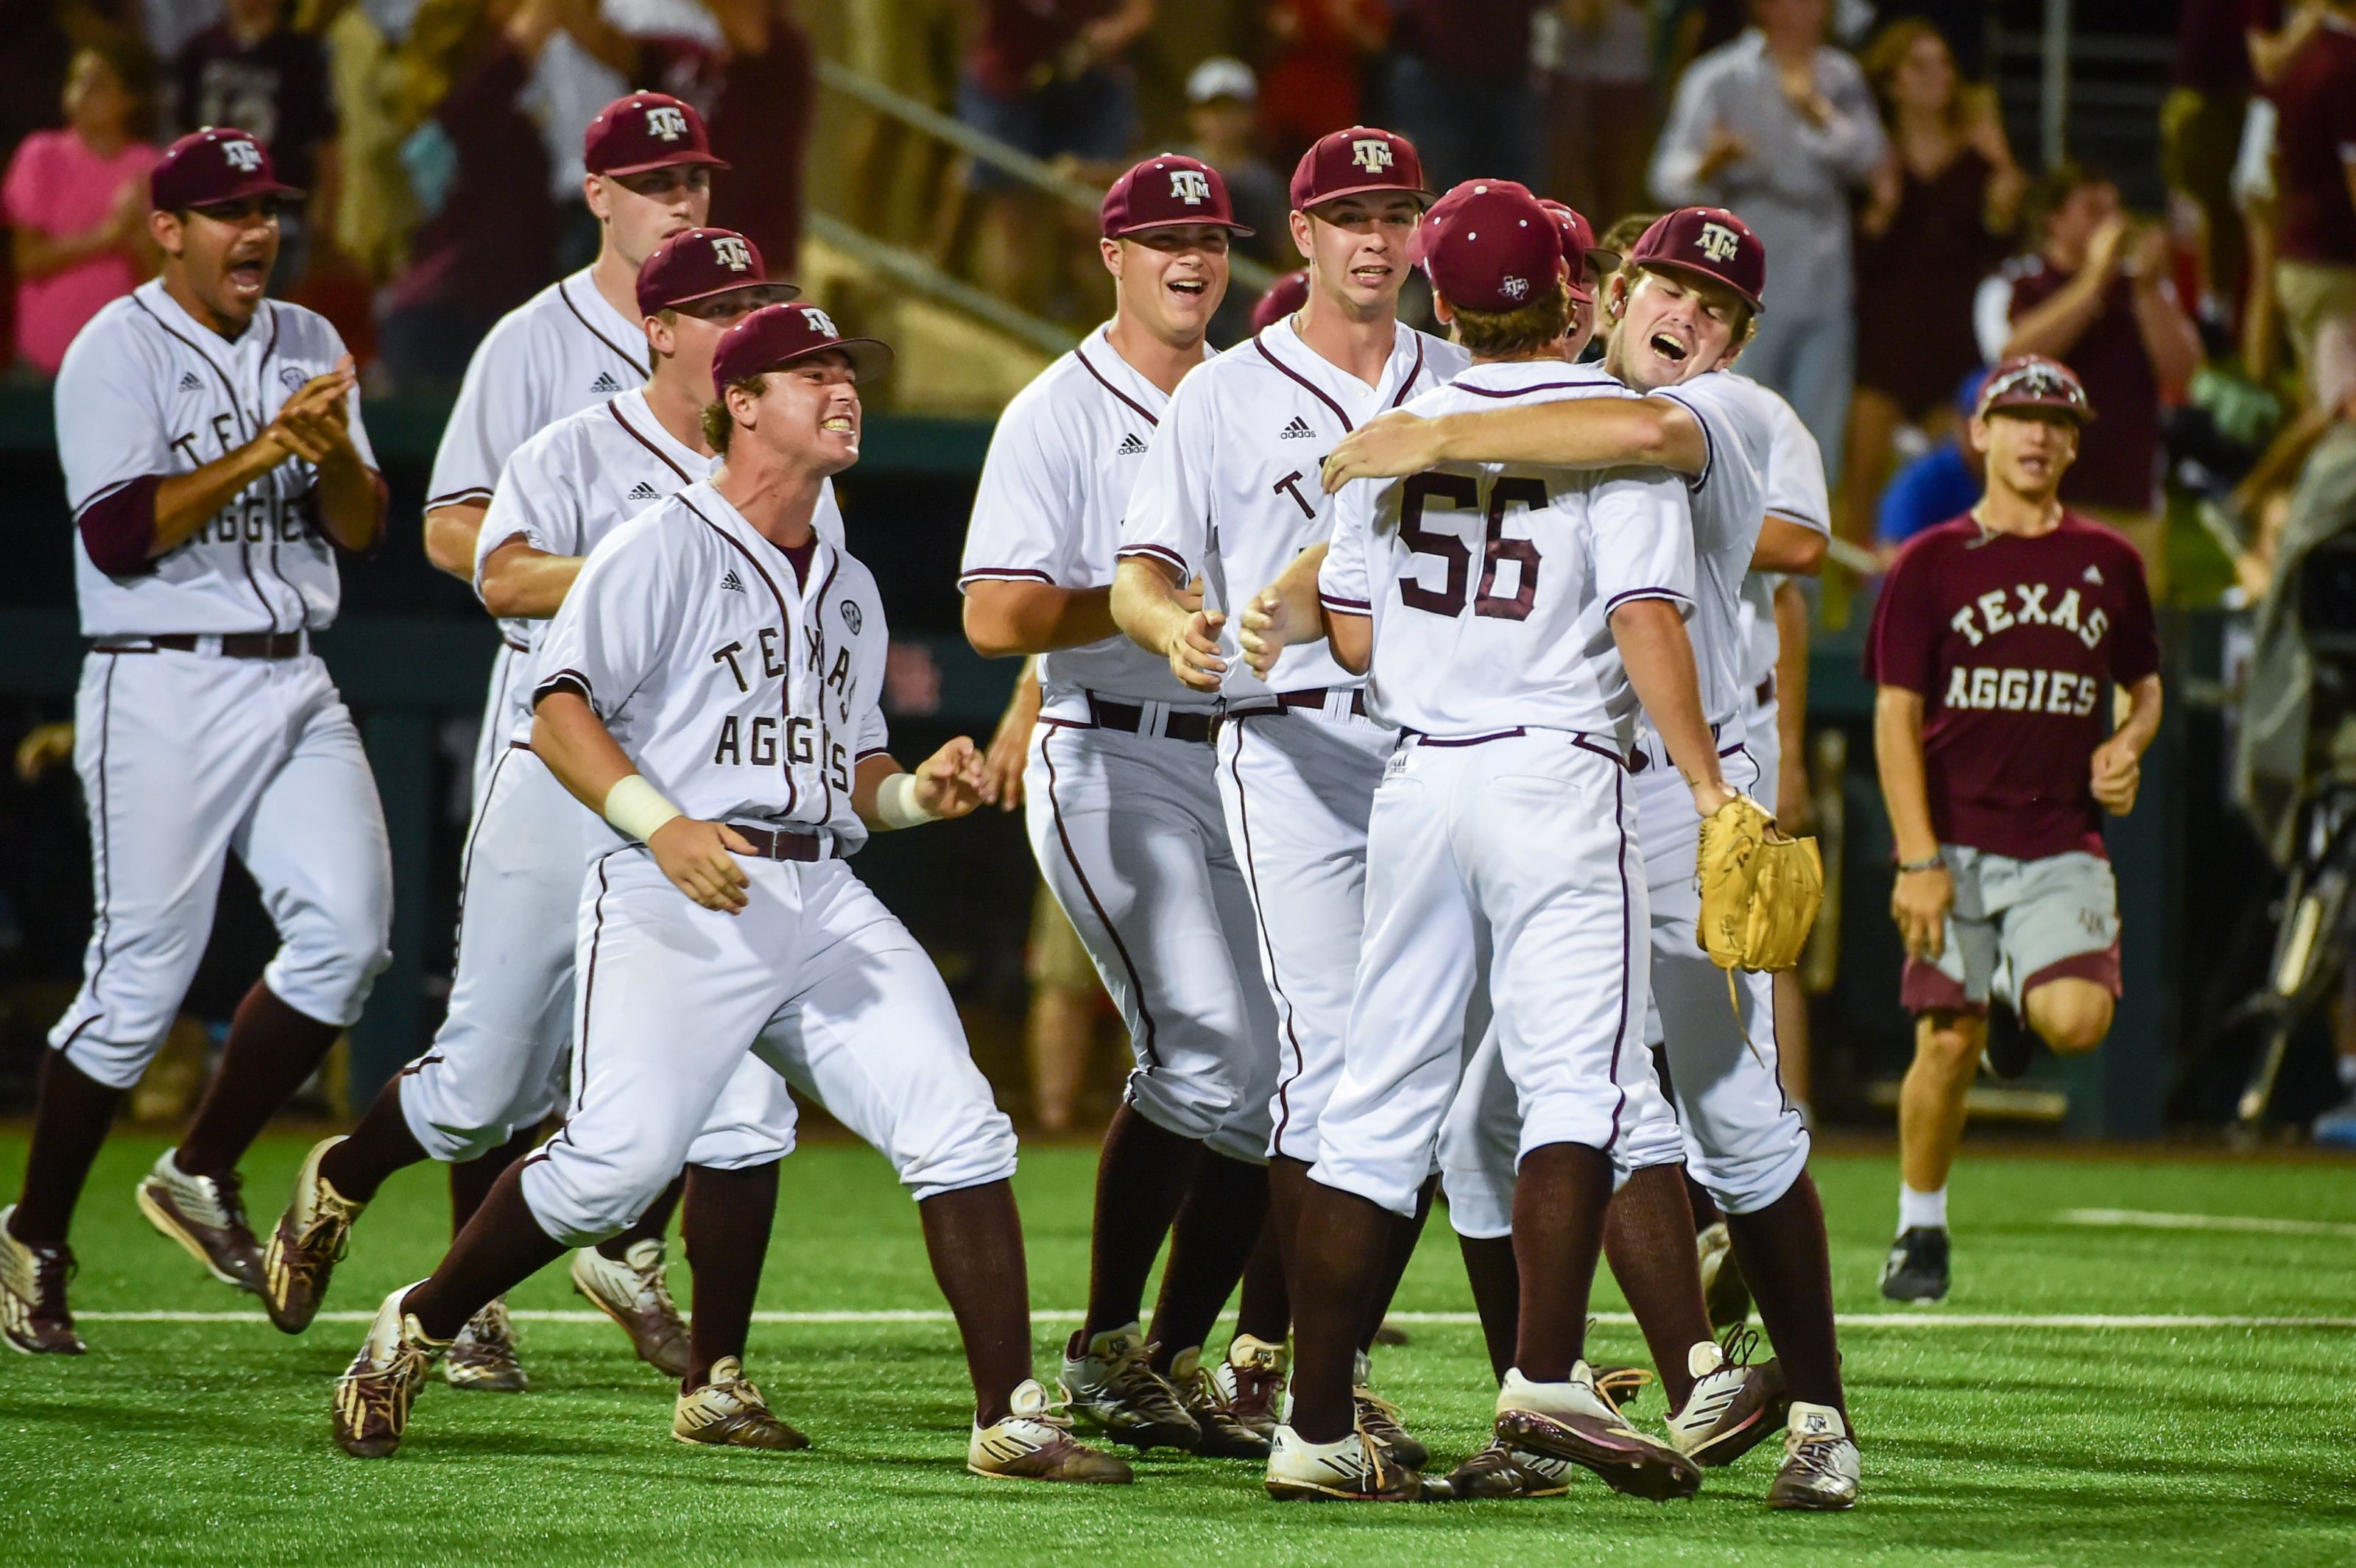 Texas A&M Baseball: Aggies move up in polls with series win over No. 1 Vandy